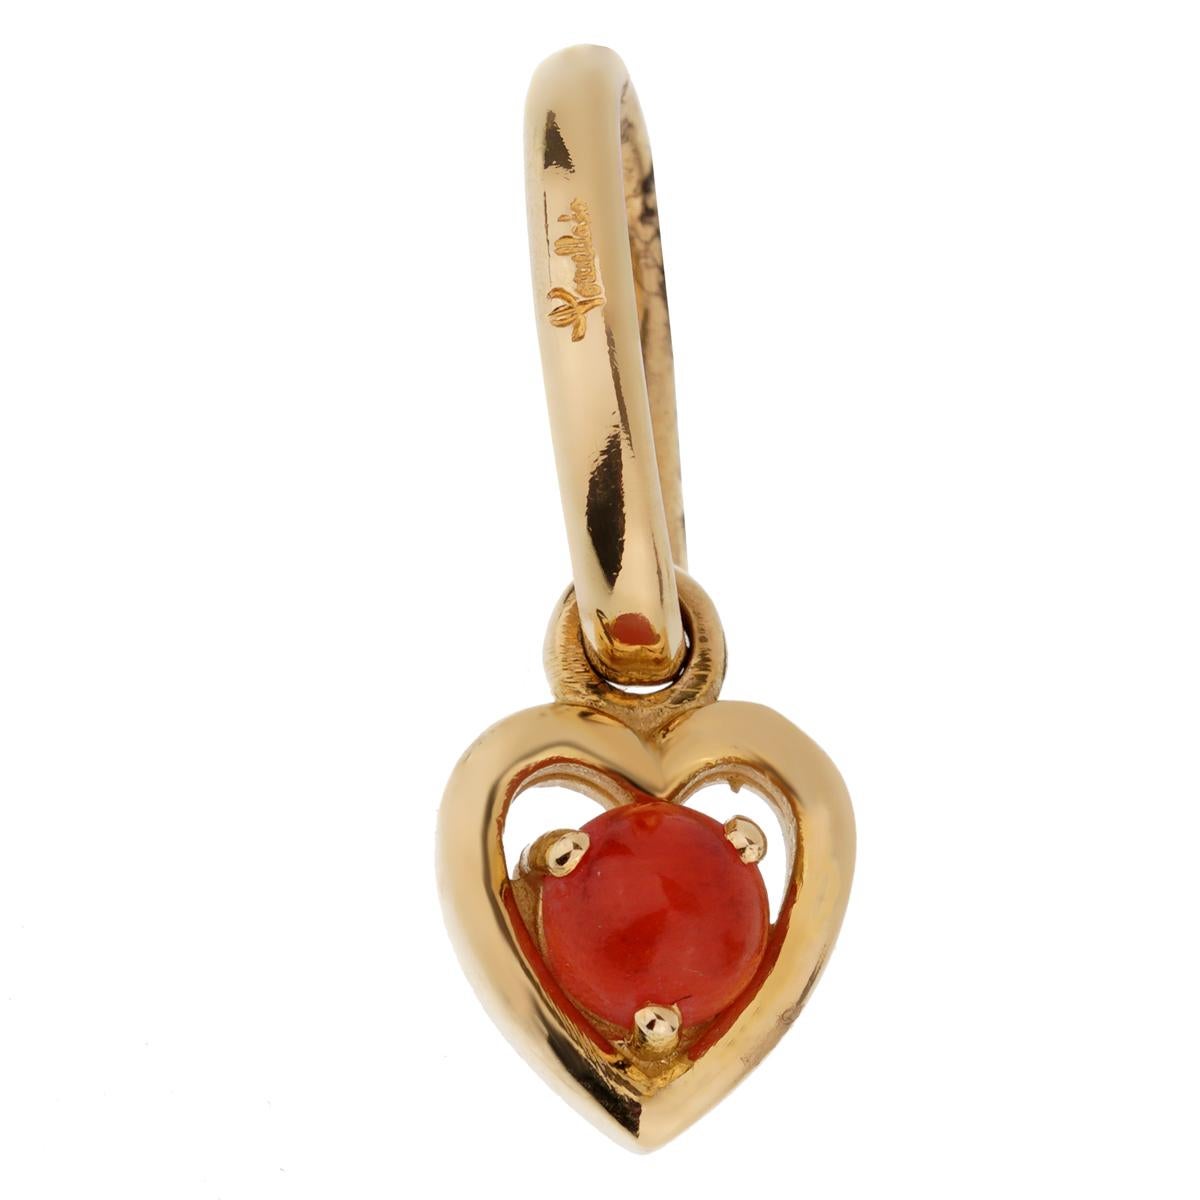 A chic brand new Pomellato charm pendant featuring a .28ct Red Coral set in 18k yellow gold. 

Sku: 2221